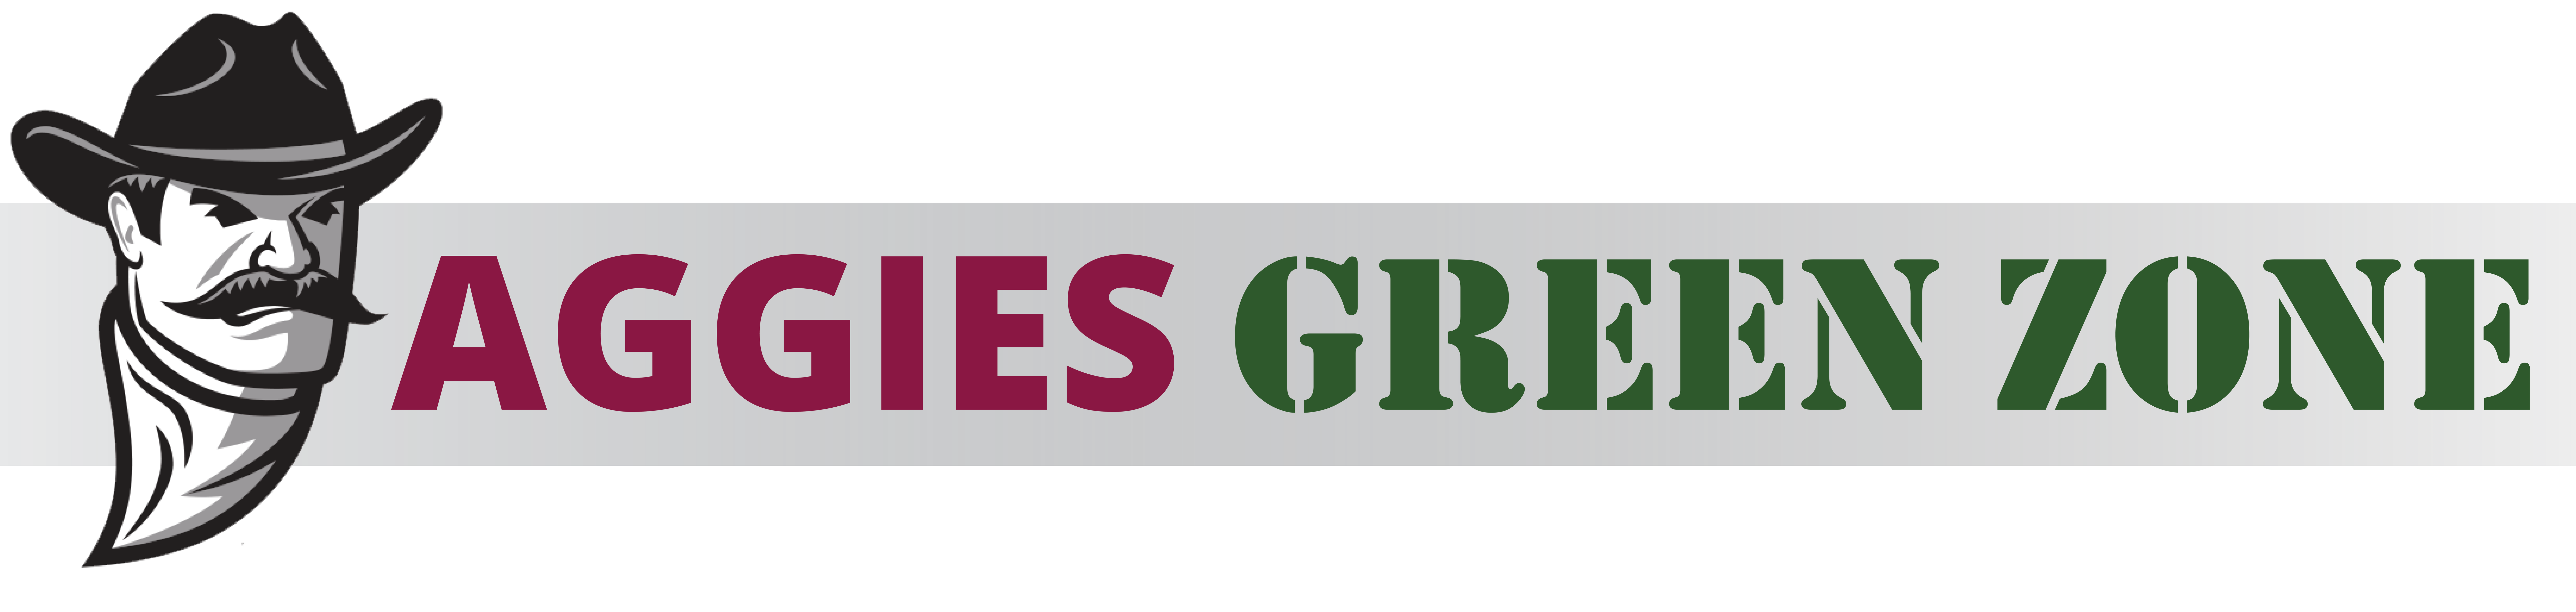 AggiesGreenZone_Banner.png